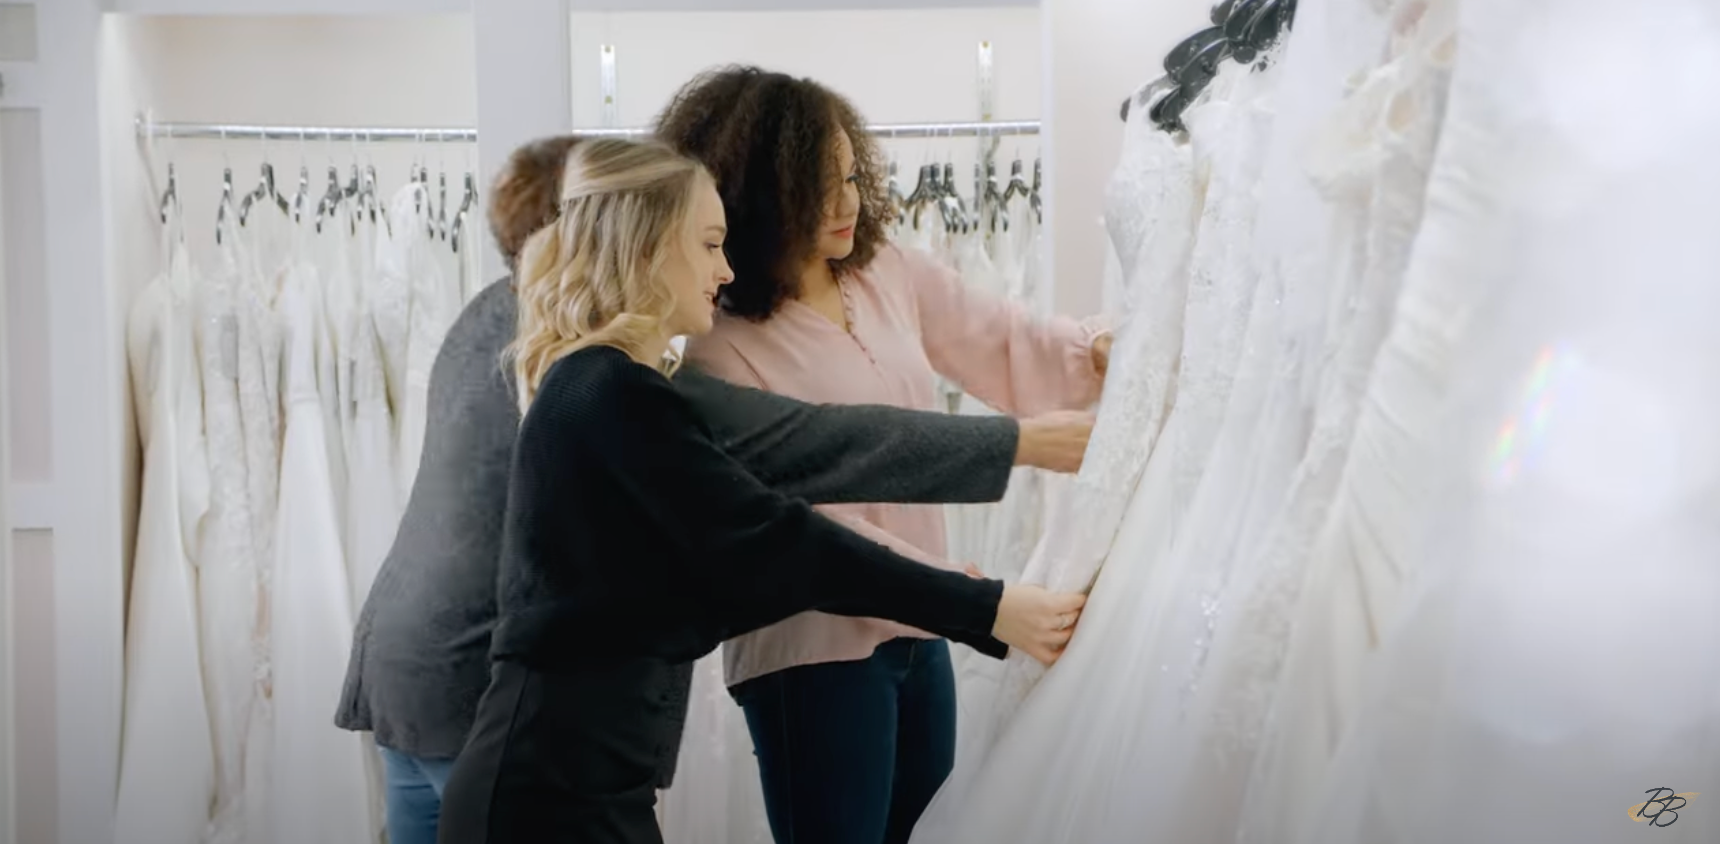 Load video: a becker&#39;s bridal commercial showing three brides shopping with their family at the historic flagship becker&#39;s bridal location in michigan and celebrating their i said yes moment in the phoenix bridal celebratory lounge located within the famous bridal shop